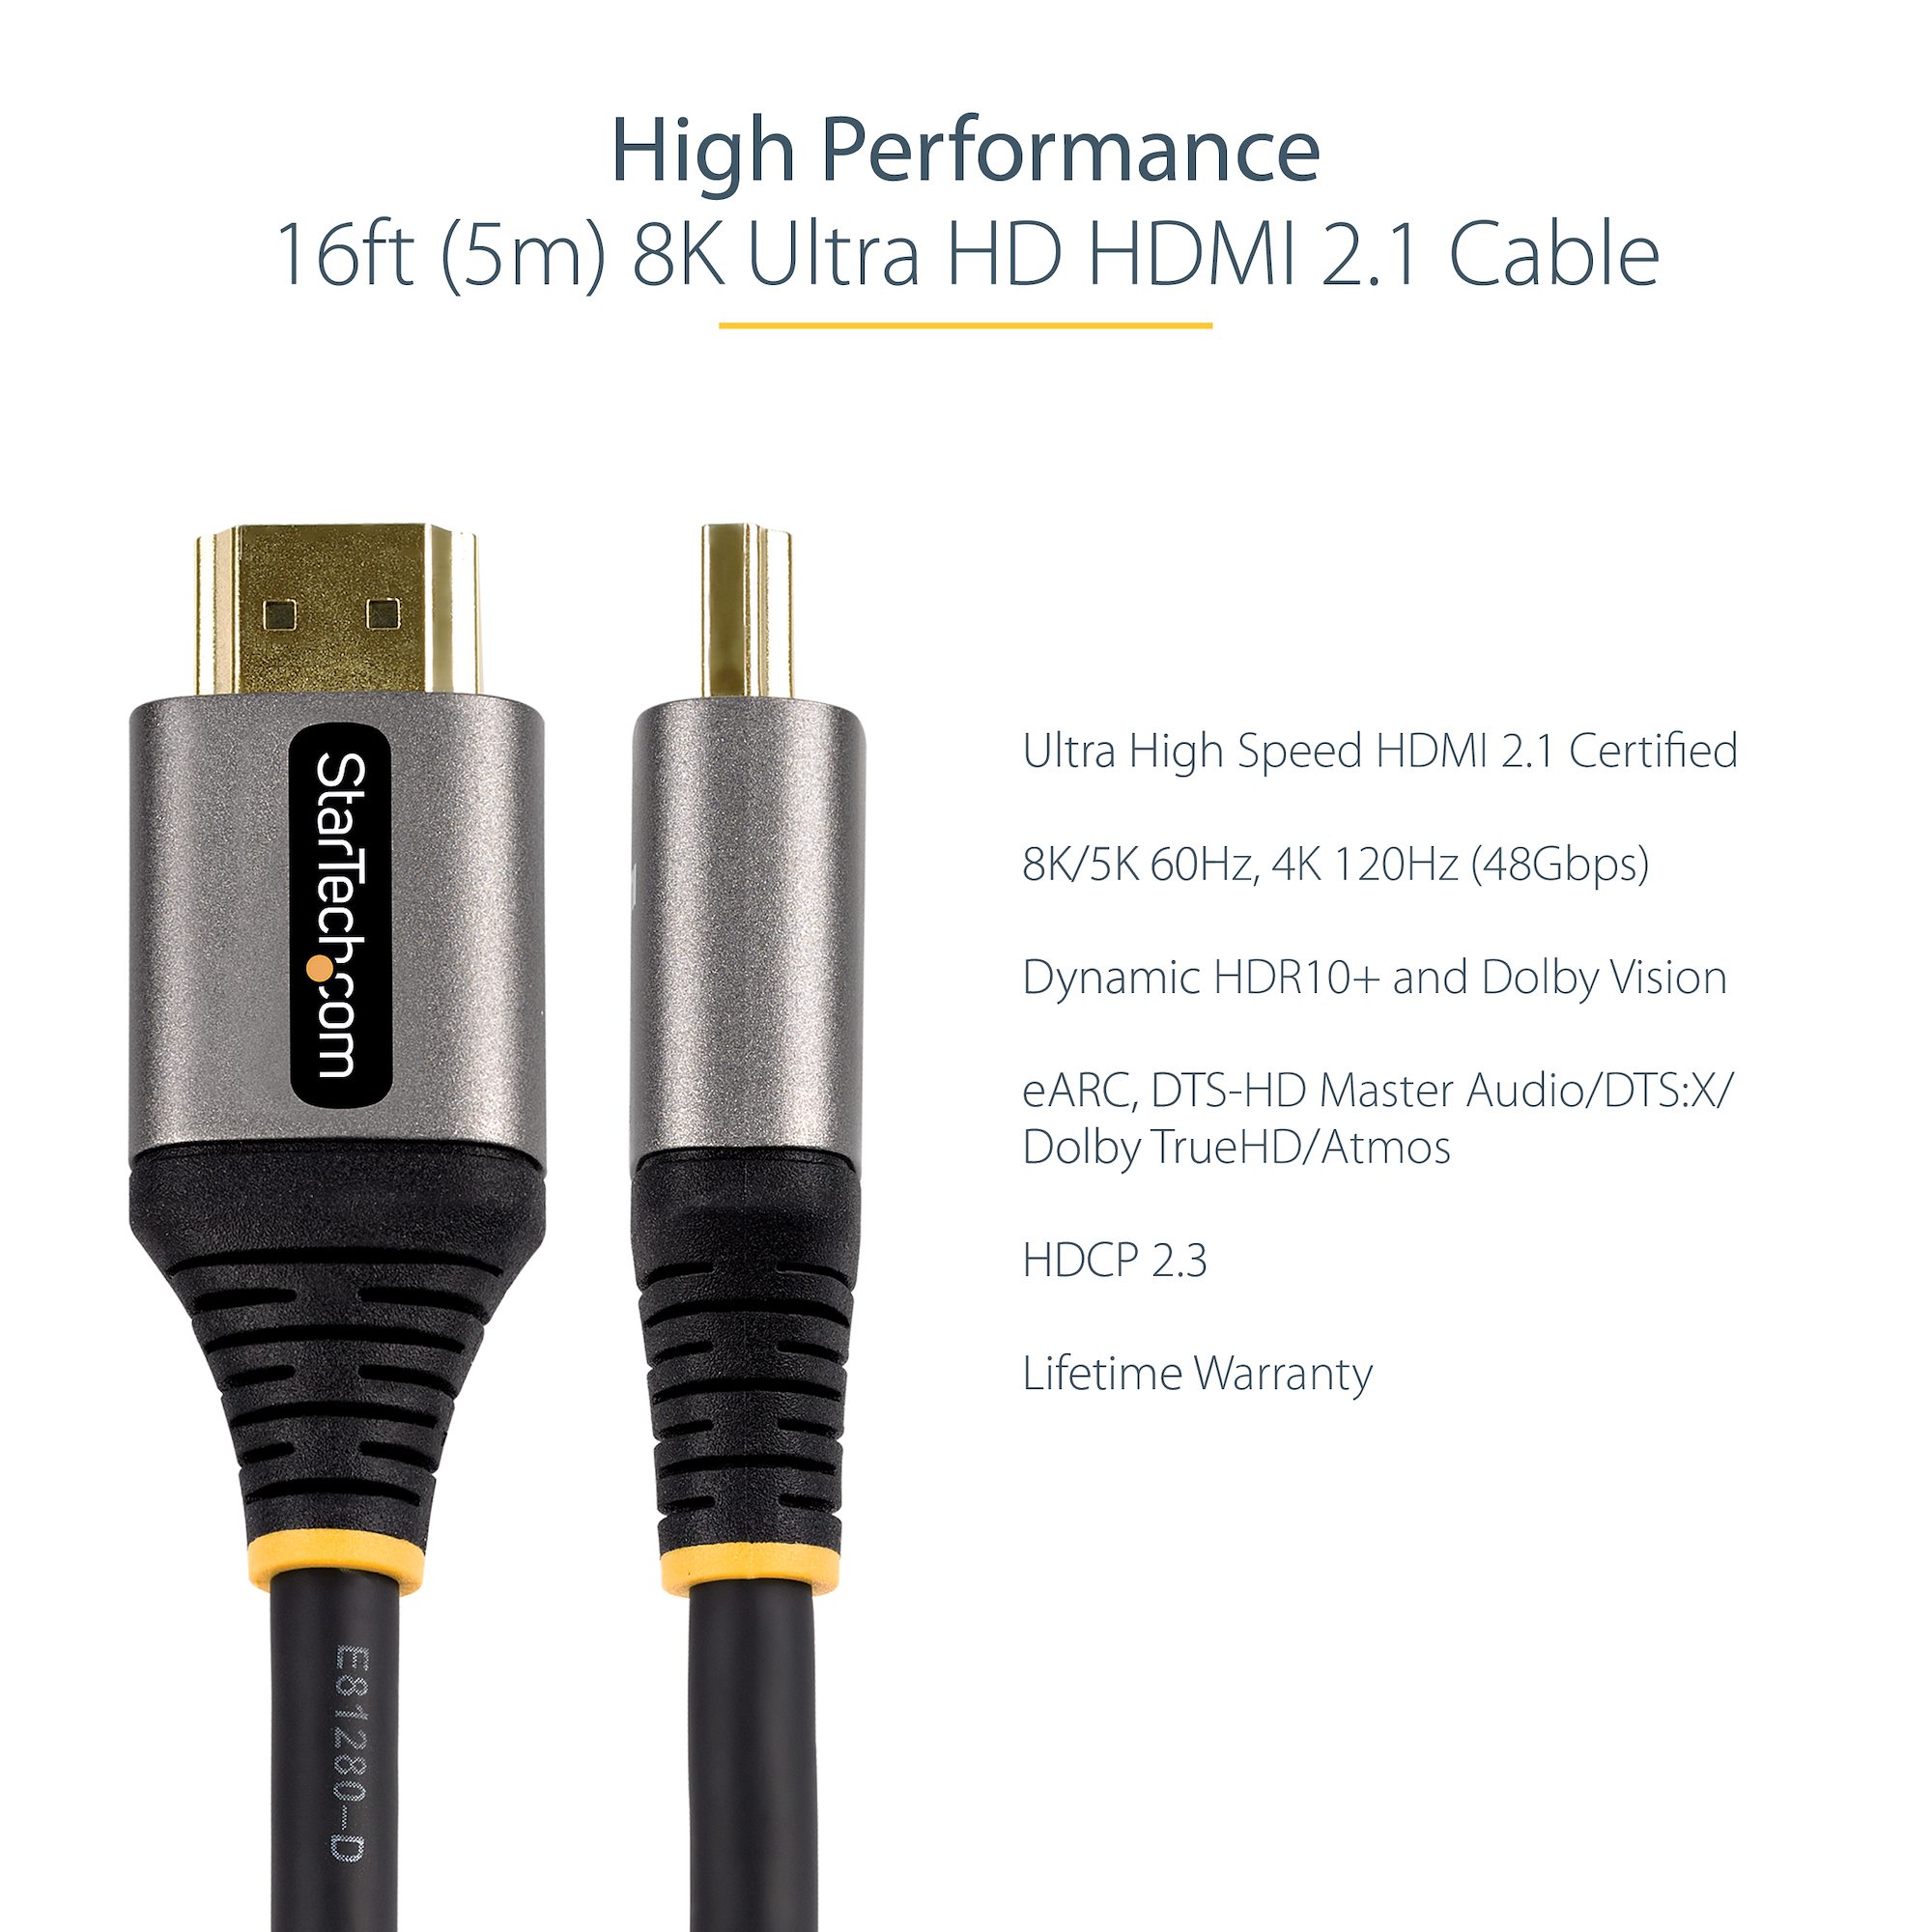 Hdmi 4k 120hz Cable, Hdmi Cable 4k 2m, Hdmi 4k 60hz 5m